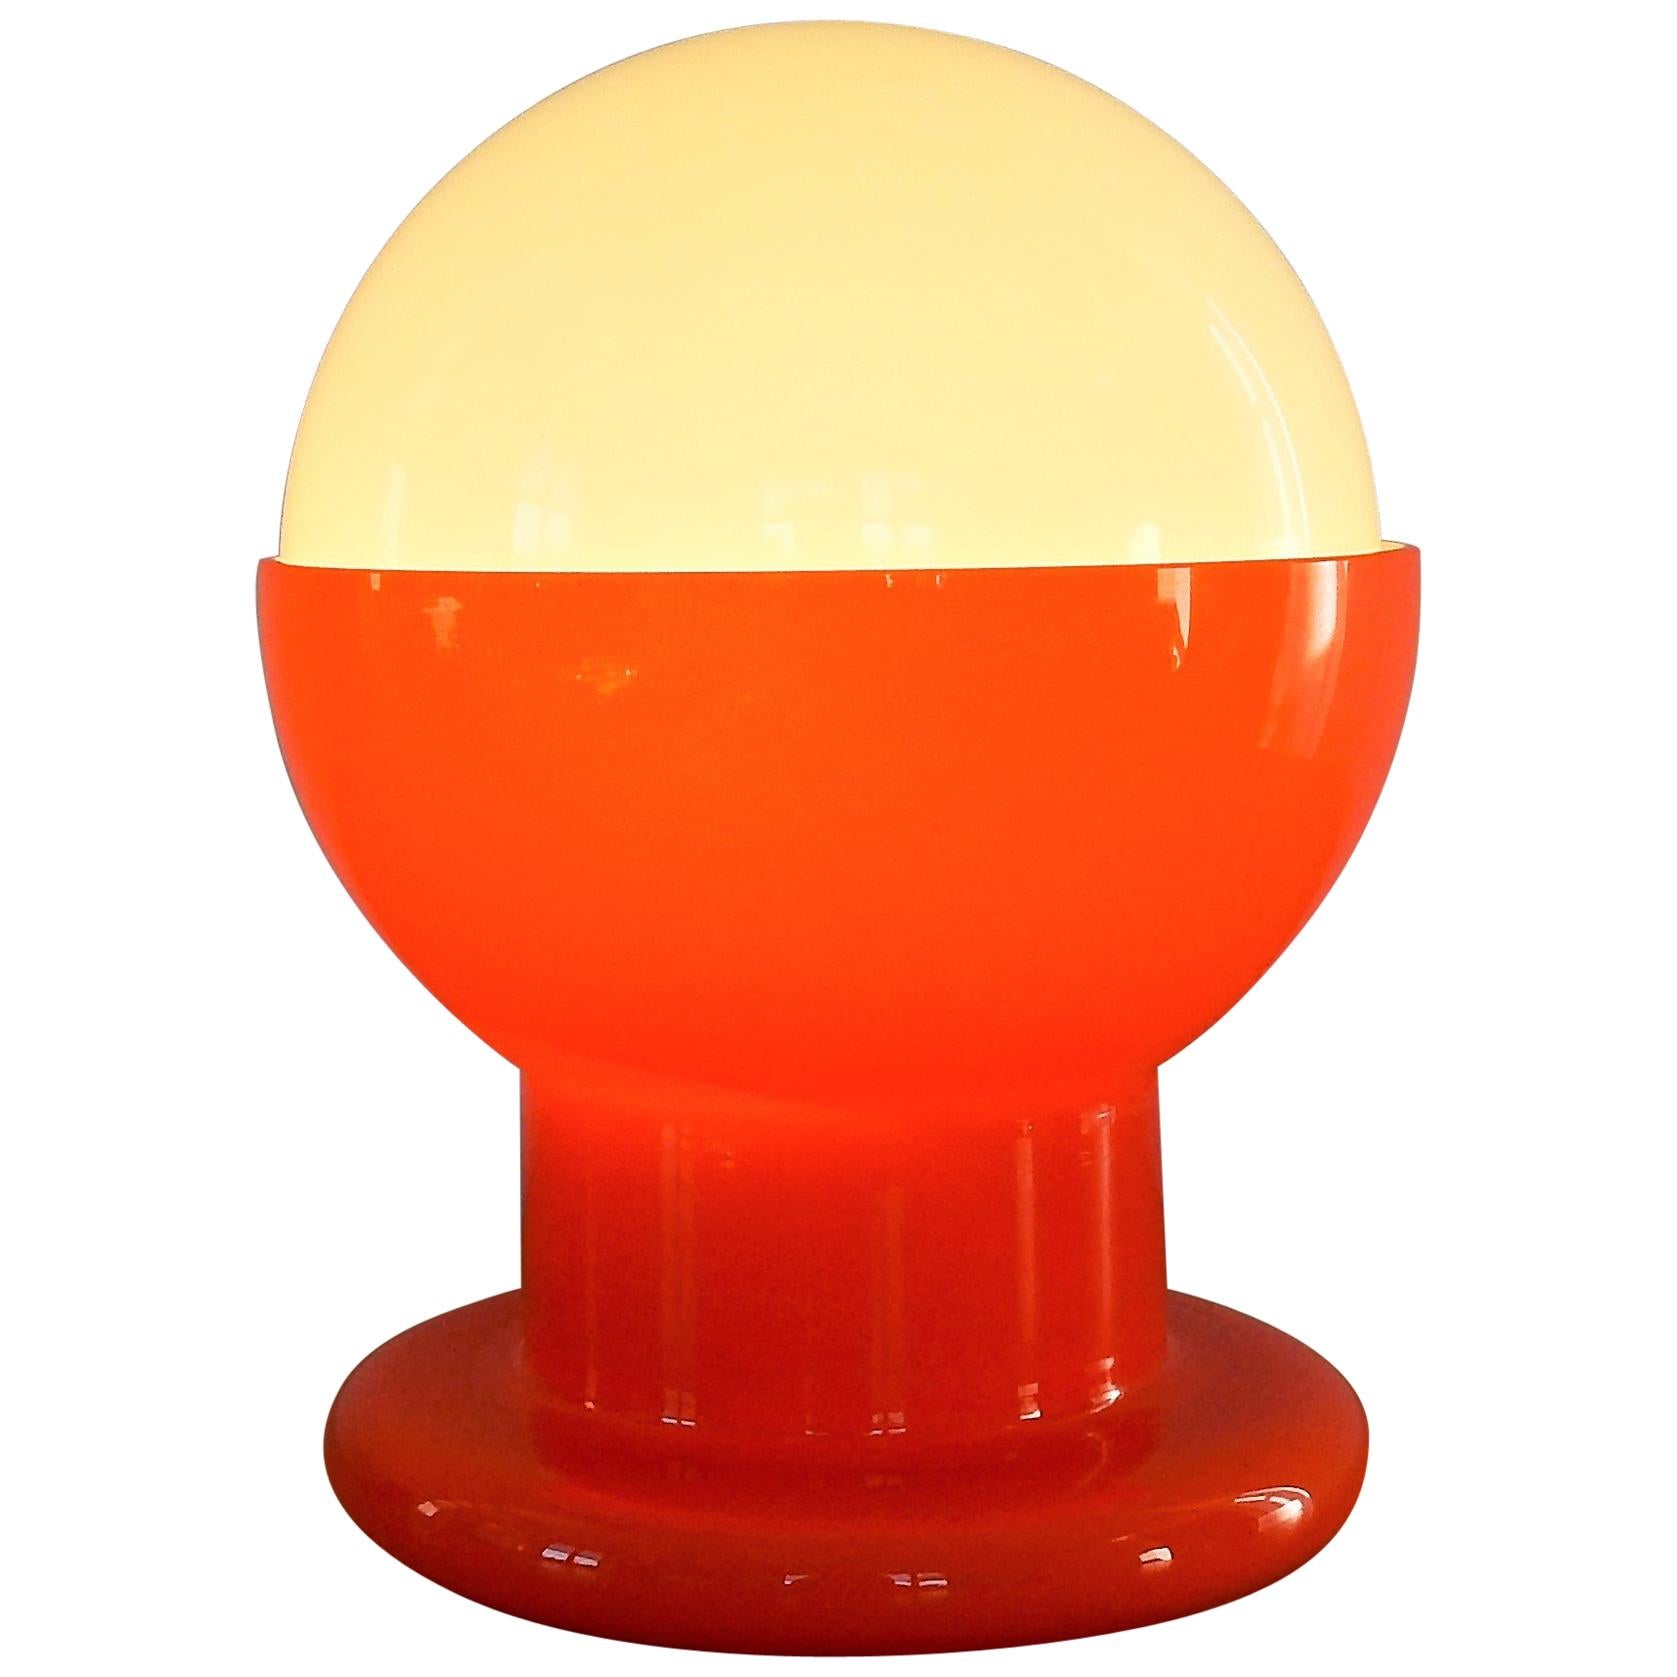 Decorative Glass Table Lamp in Orange and White